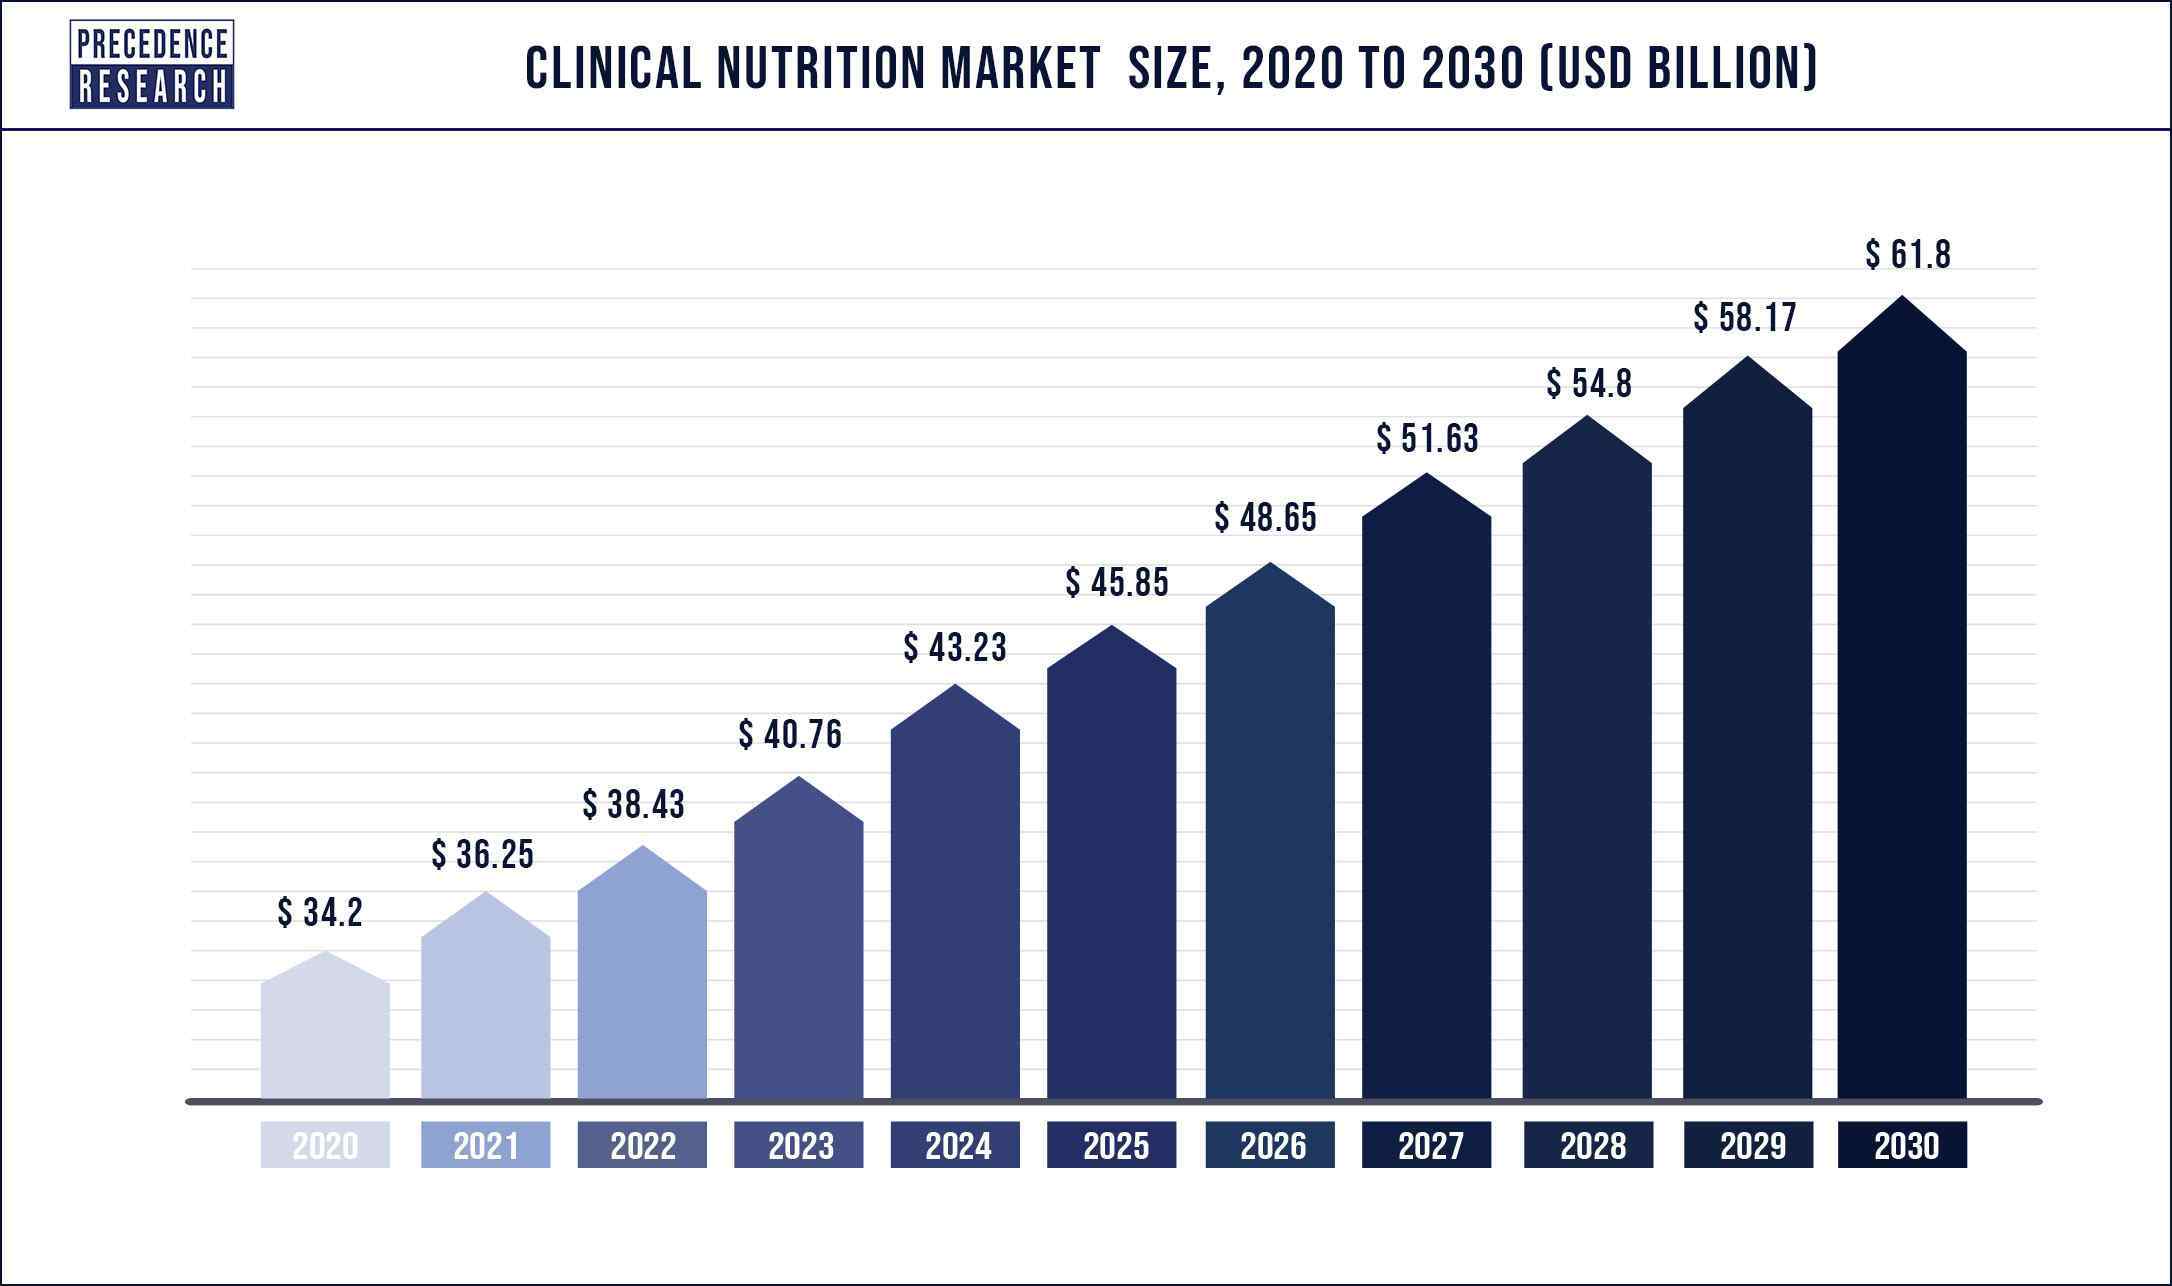 Clinical Nutrition Market Size 2020 to 2030